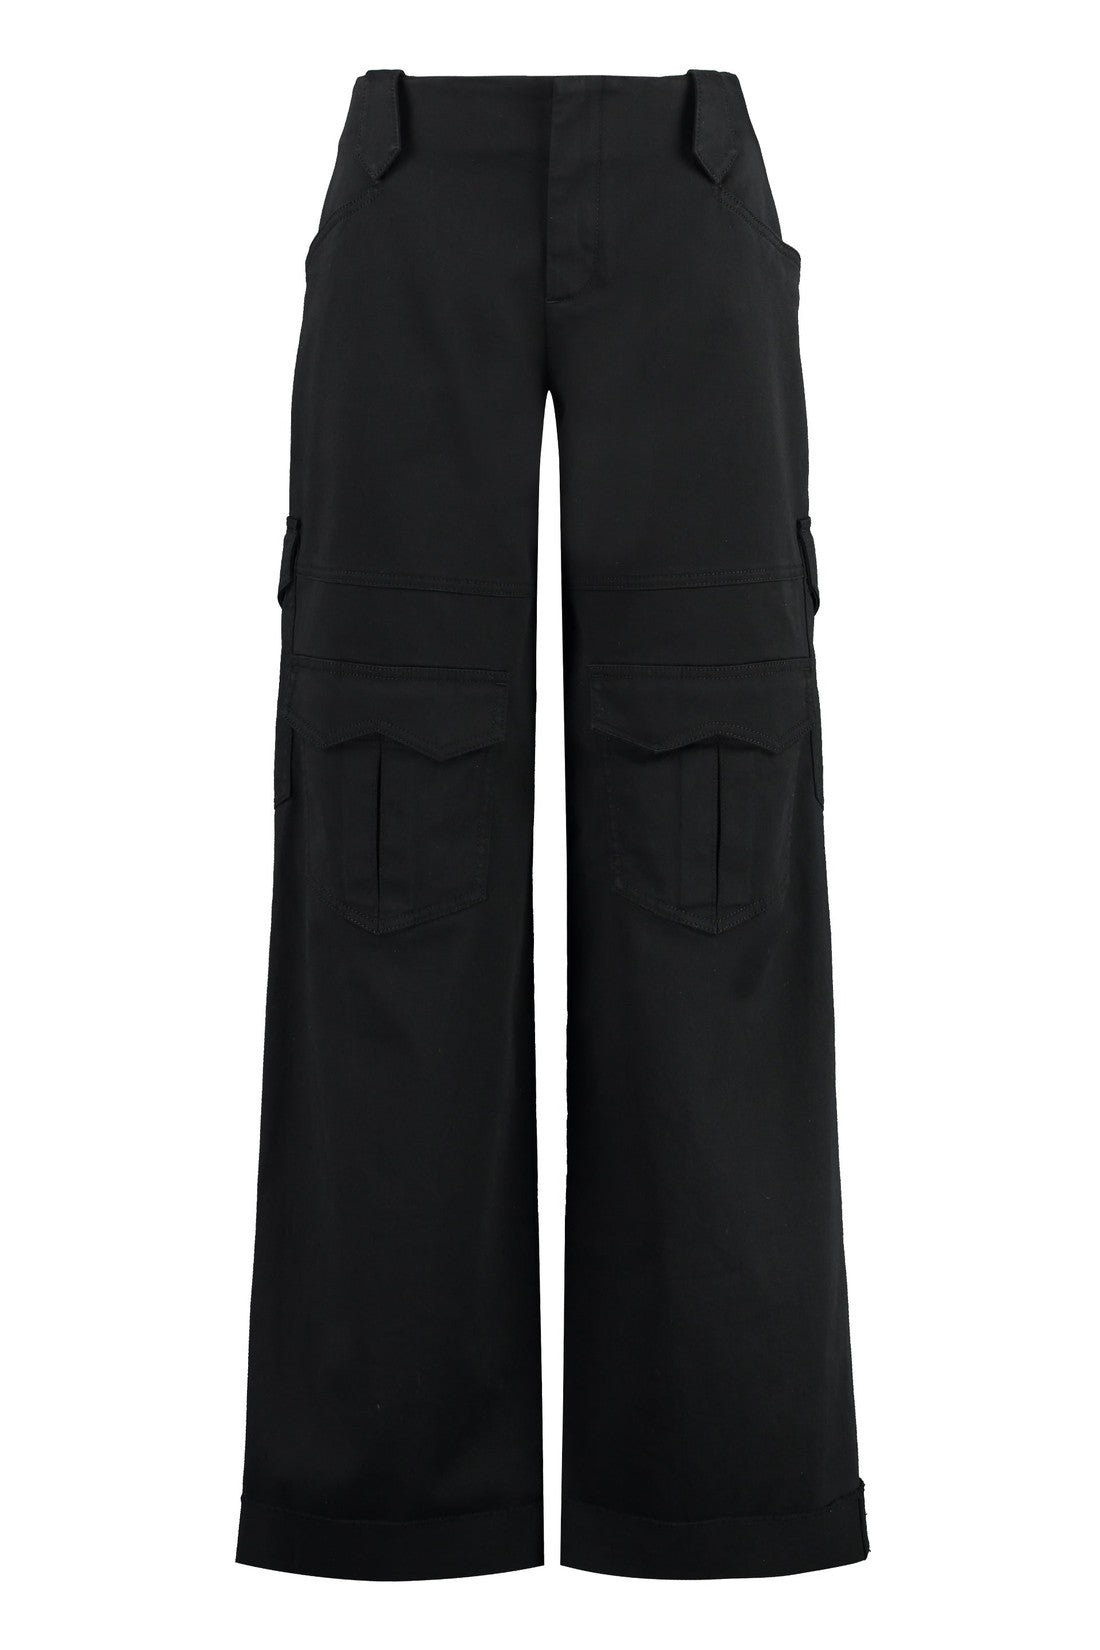 Tom Ford-OUTLET-SALE-Gabardine cargo trousers-ARCHIVIST